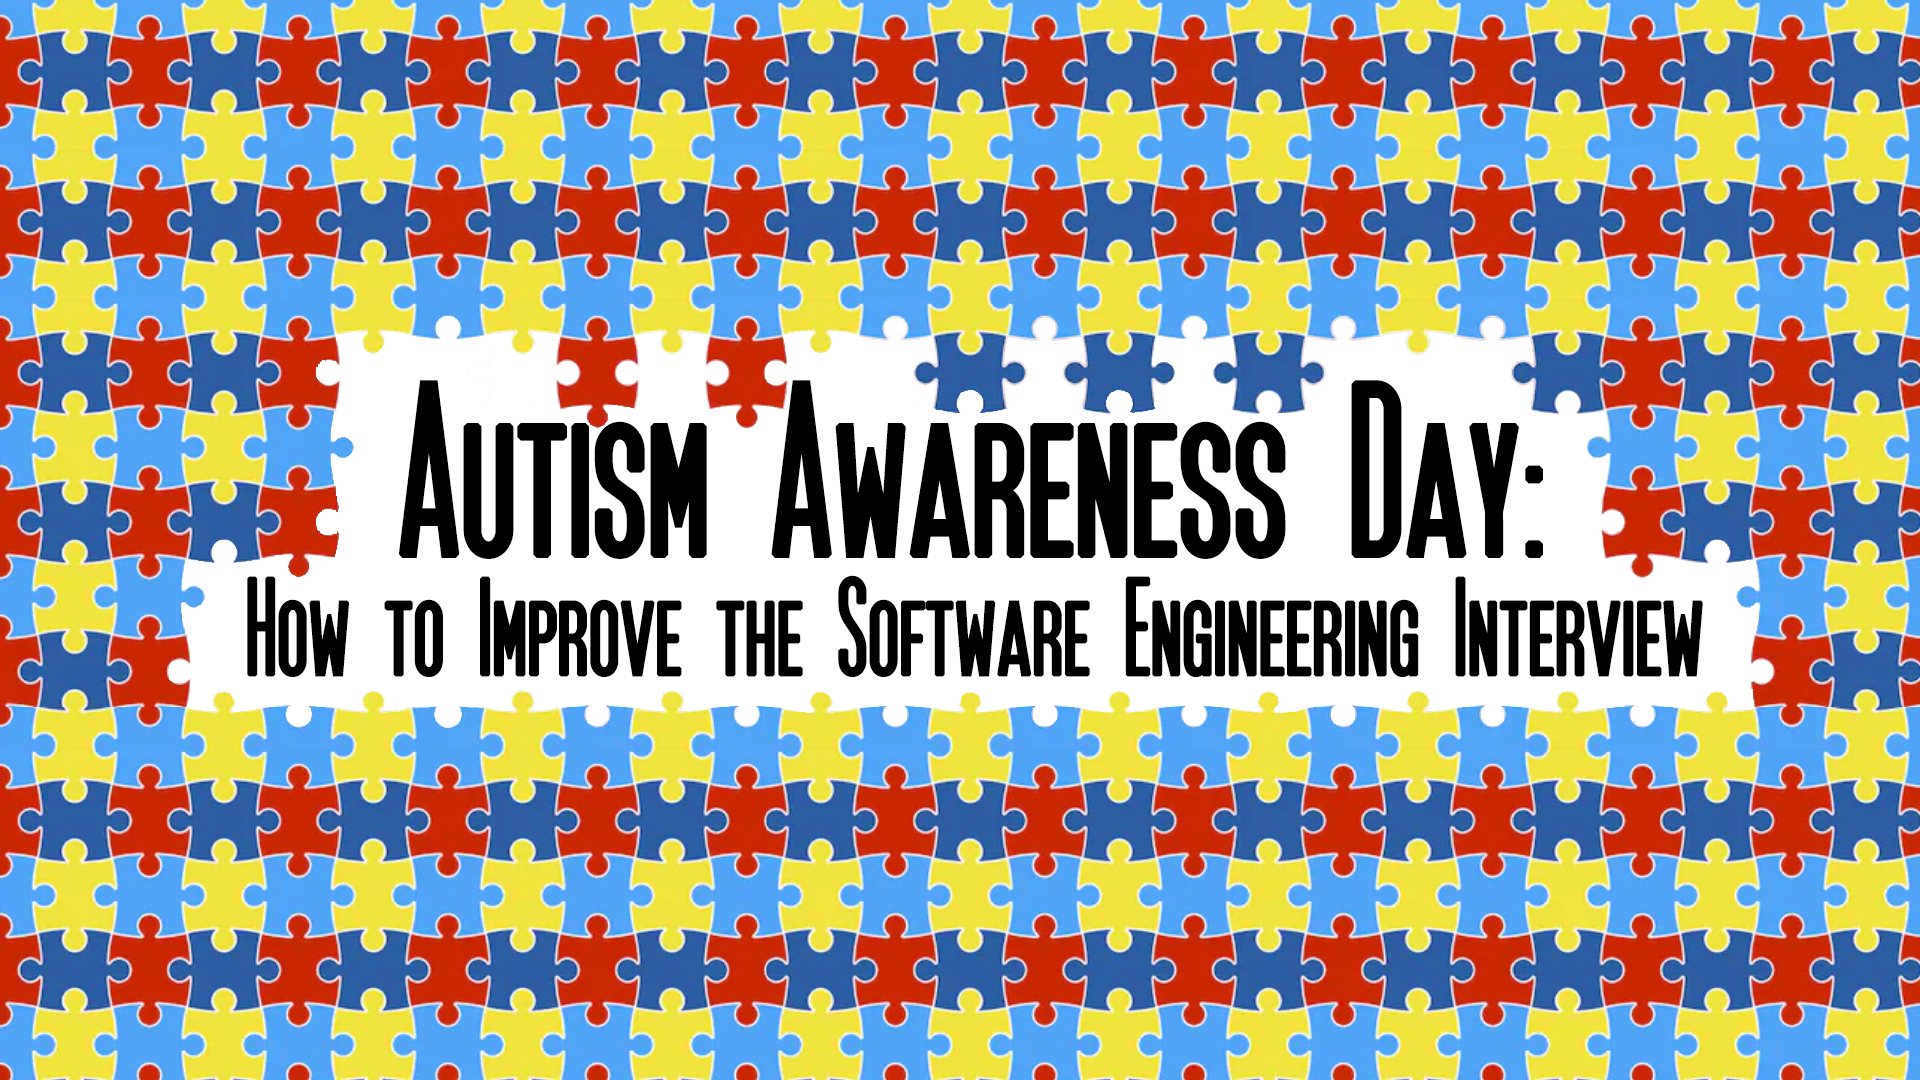 Autism Awareness Day - How to Improve the Software Engineering Interview